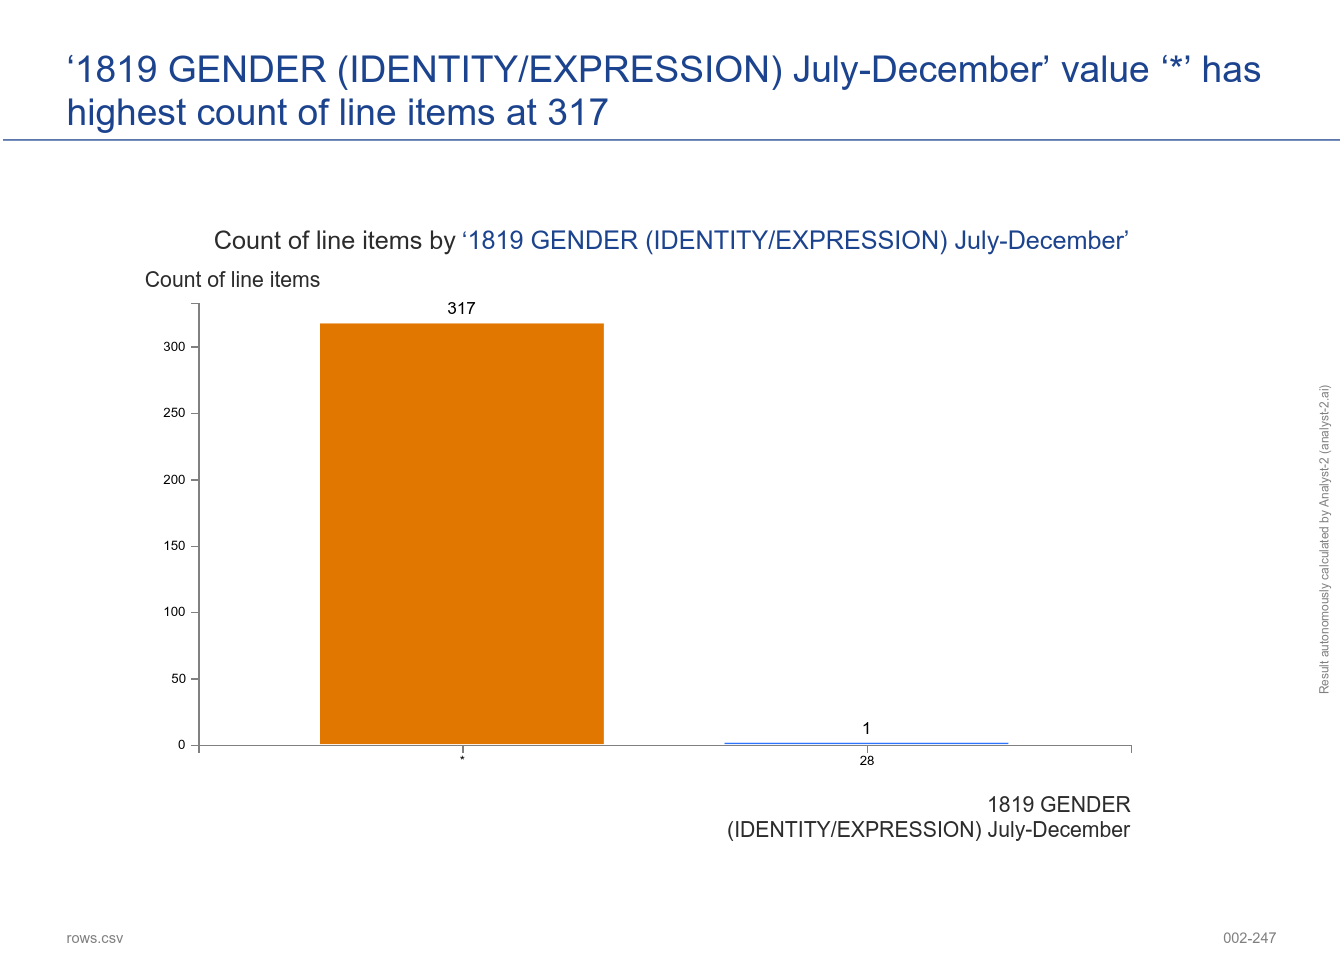 The ‘1819 GENDER (IDENTITY/EXPRESSION) July-December’ value ‘*’ has the highest count of line items at 317. (2018-2019 Bullying Harassment Discrimination Bi- Annual Report - 002-247)